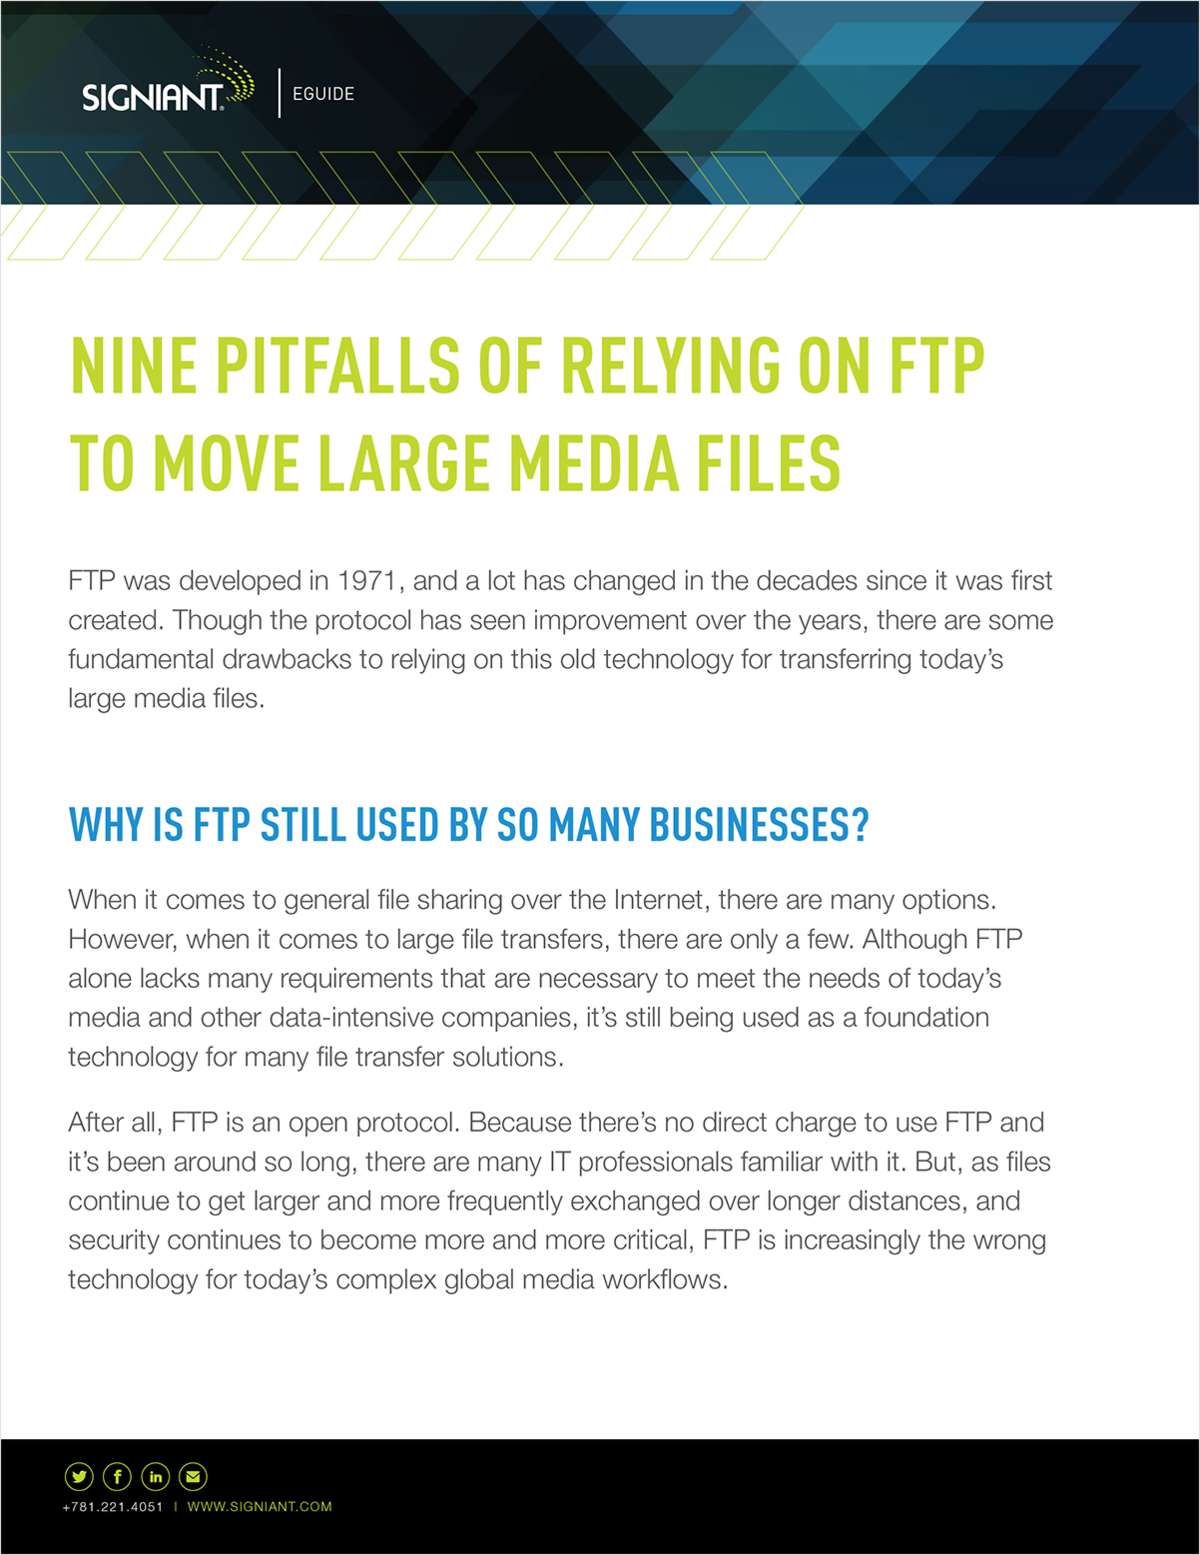 9 Pitfalls of Relying on FTP to Move Media Files